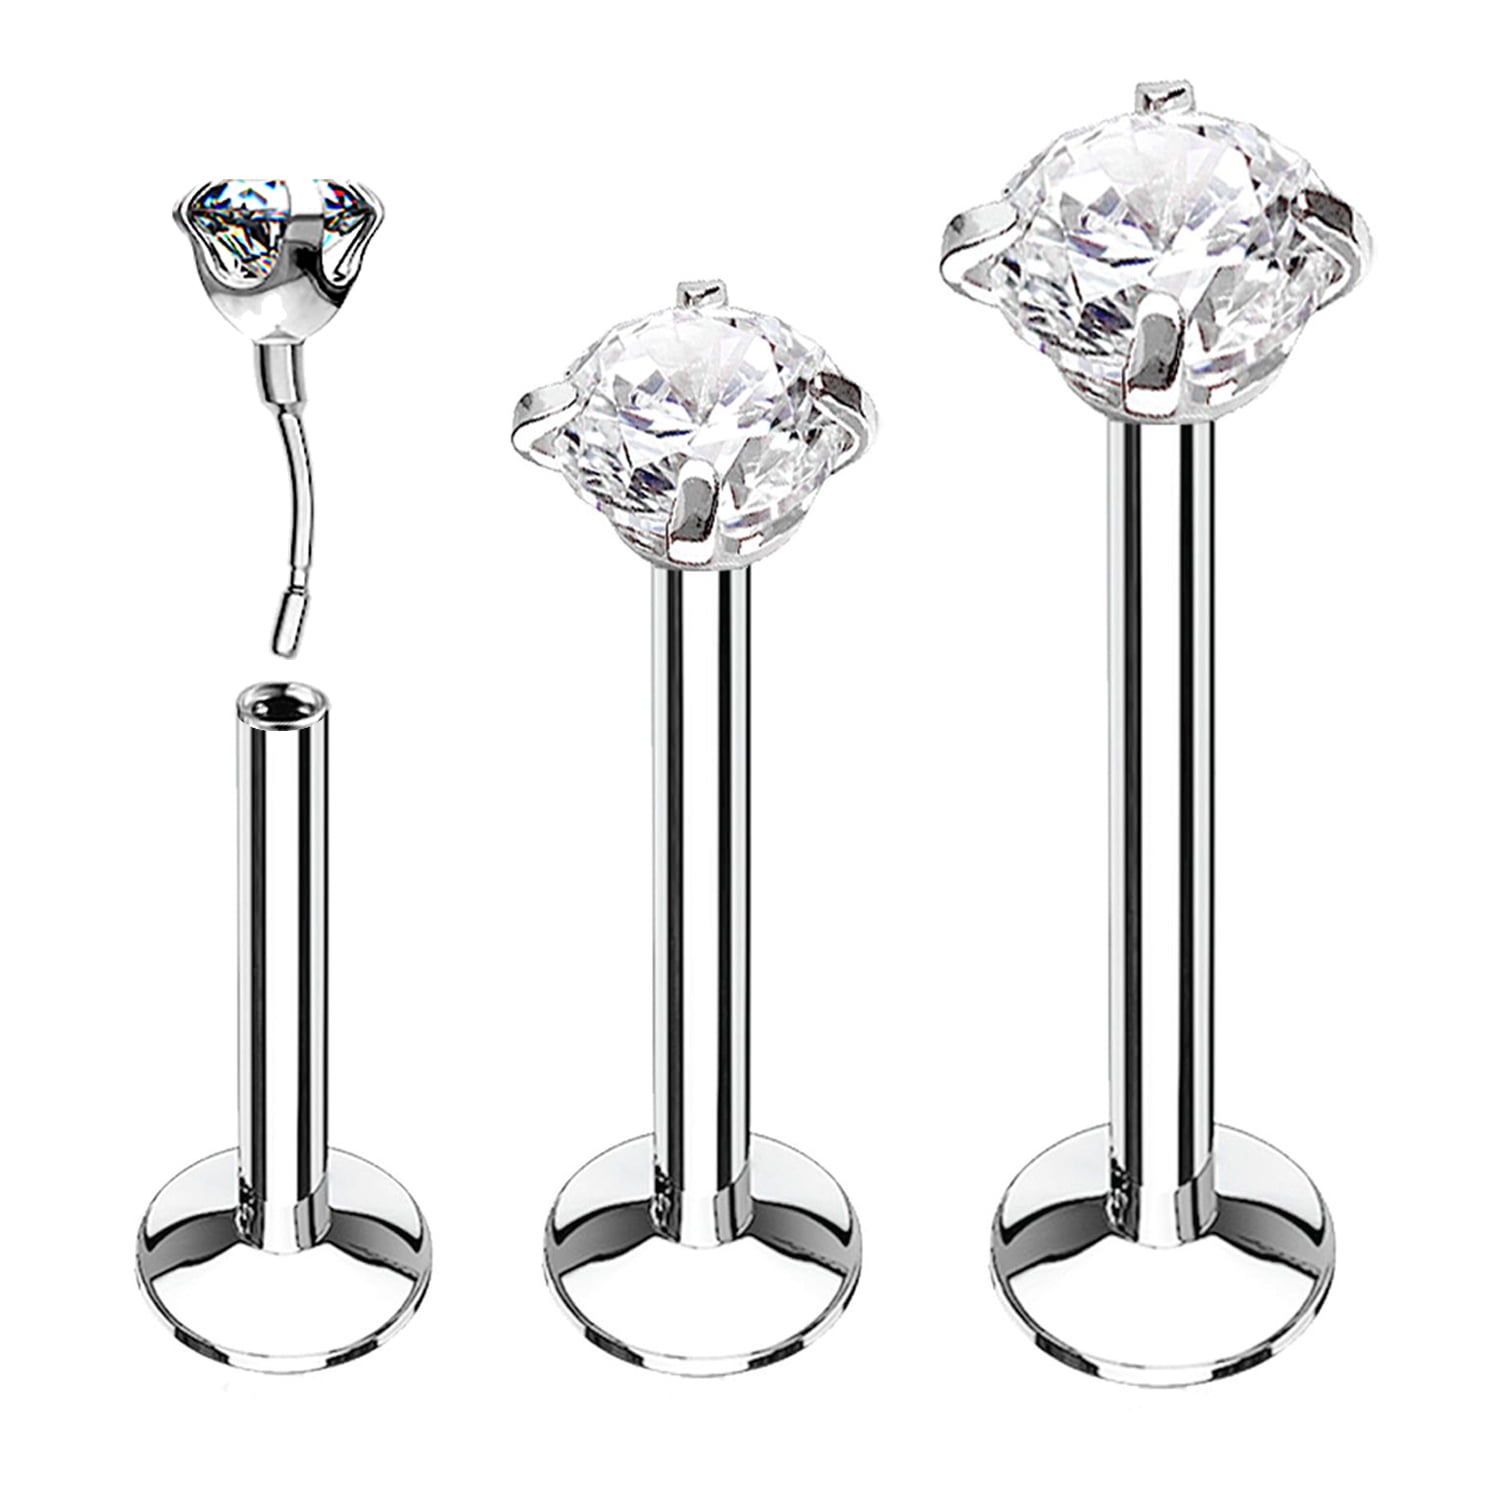 BodyJ4You Labret Stud Tragus Earring 16G 18G 20G CZ Crystal Push in Surgical Steel Helix Monroe Jewelry 